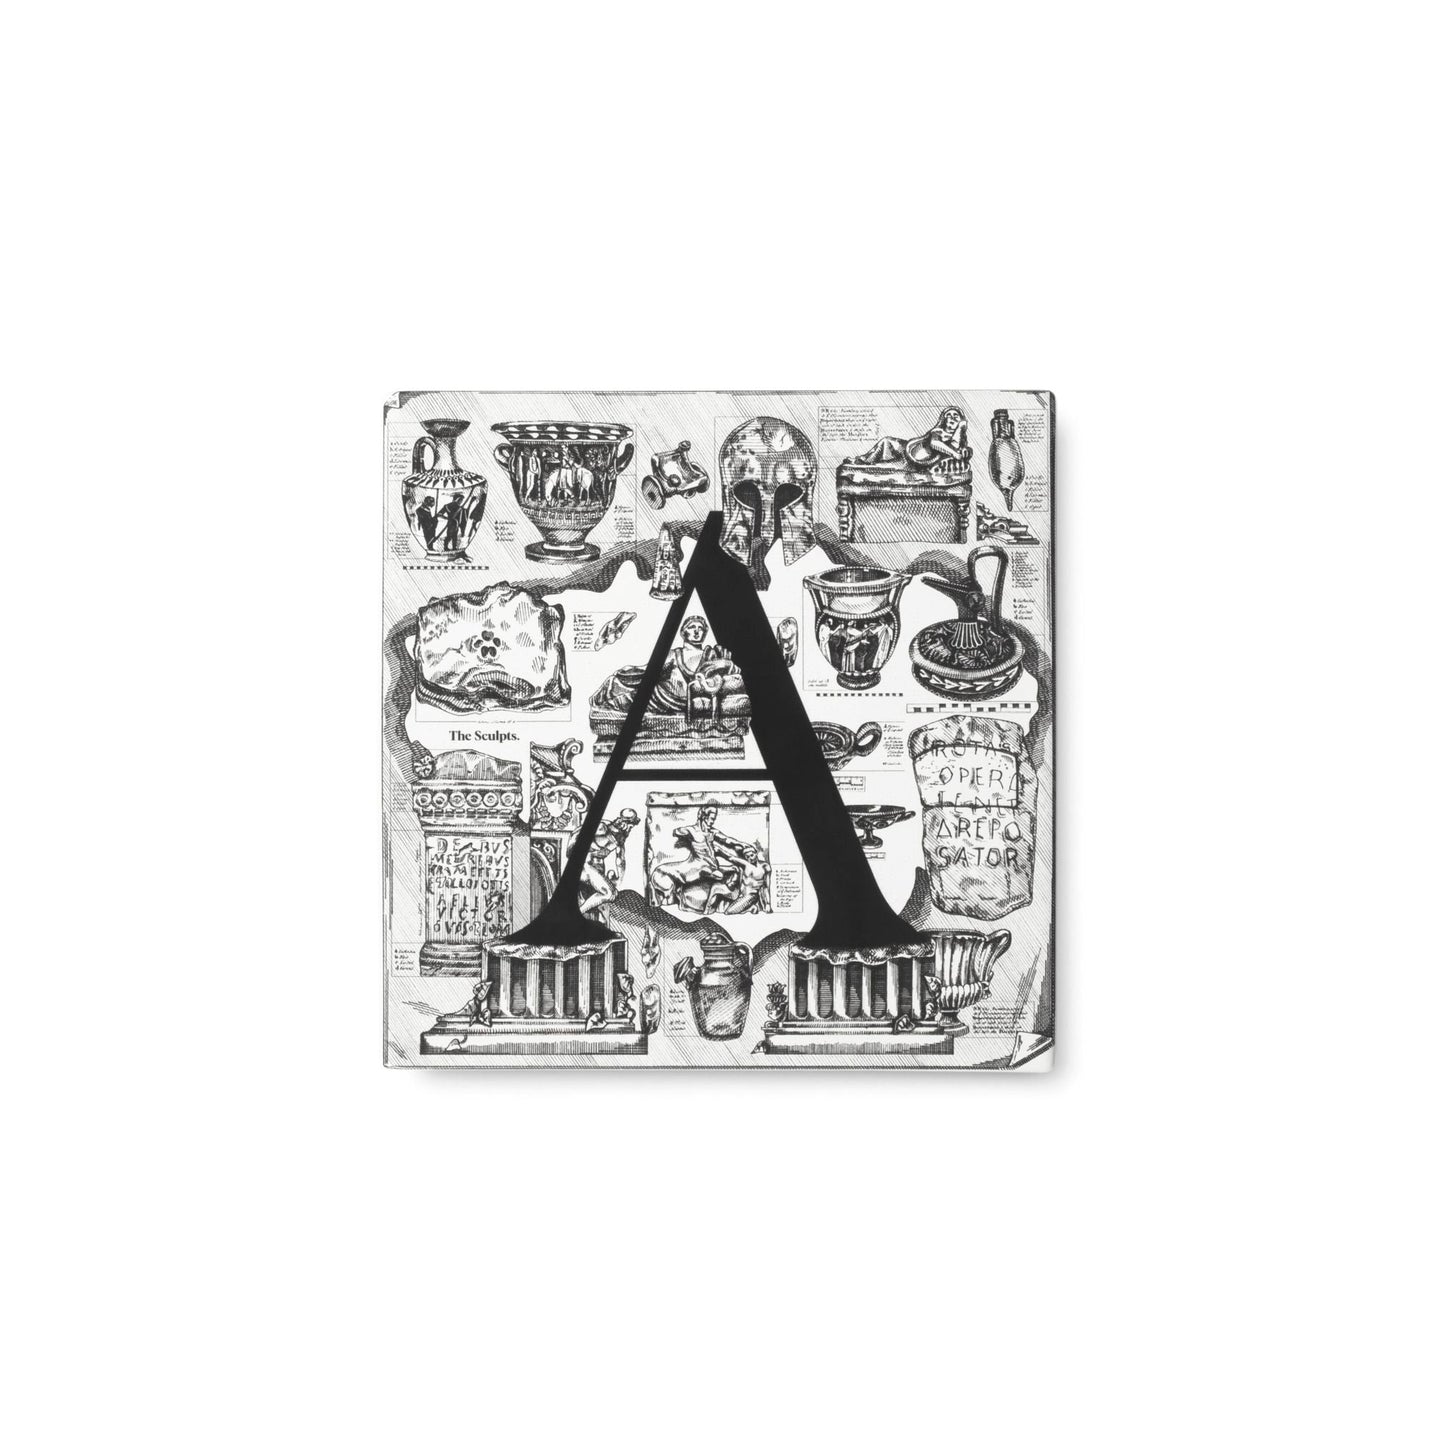 Letter A tile by the Sculpts the feet of the capital A rests on the sketched ruins of dorian columns. Around the A is scattered a mixture of artefacts from our collection.